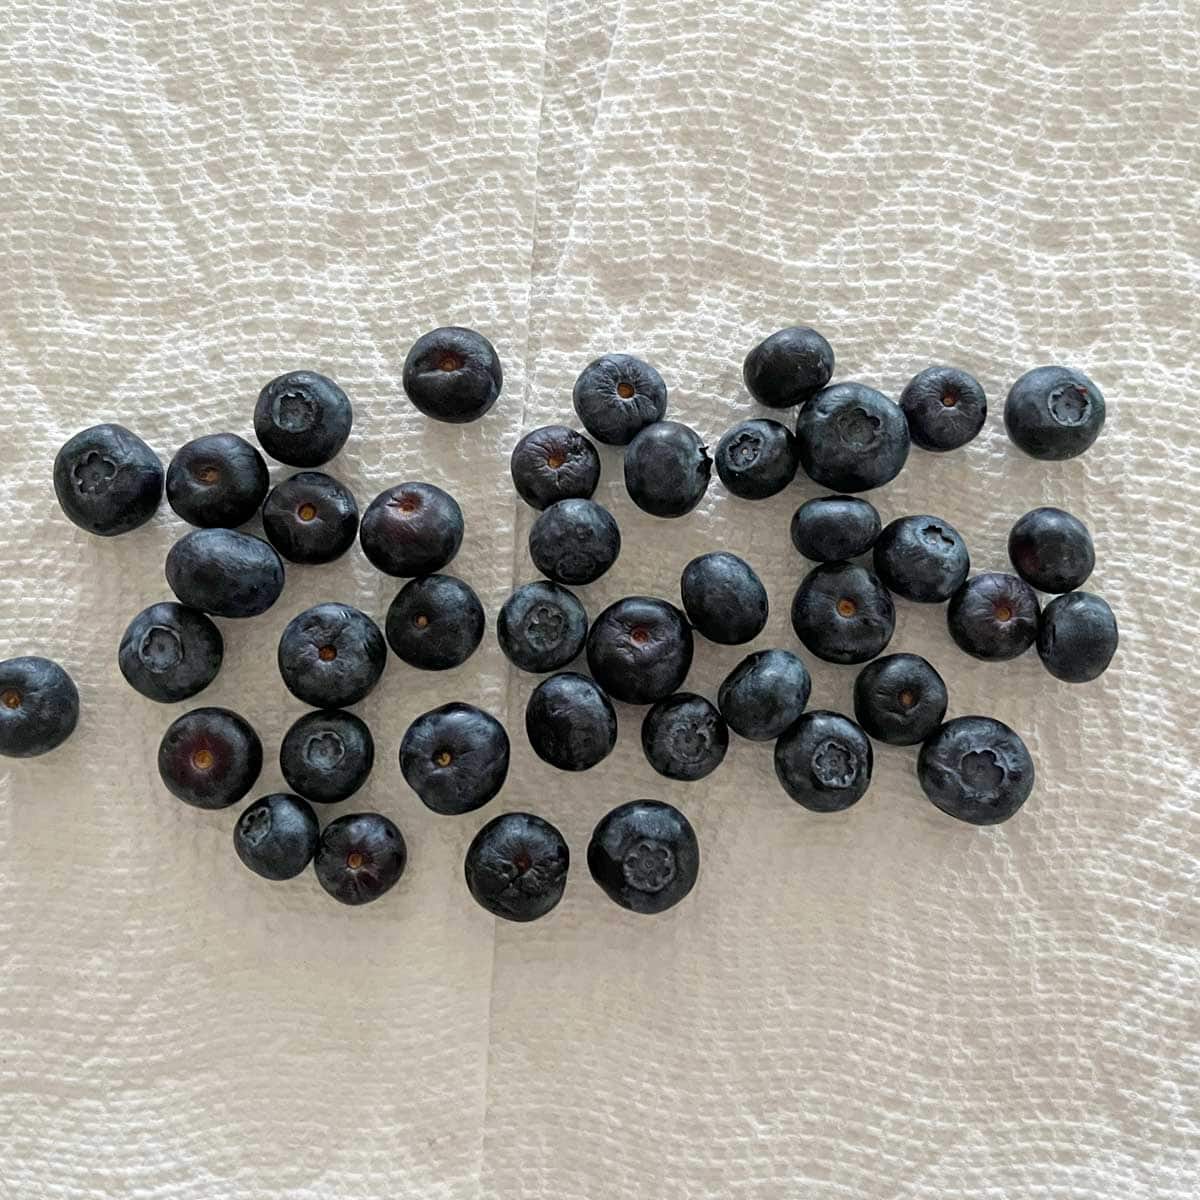 Drying blueberries on paper towels.